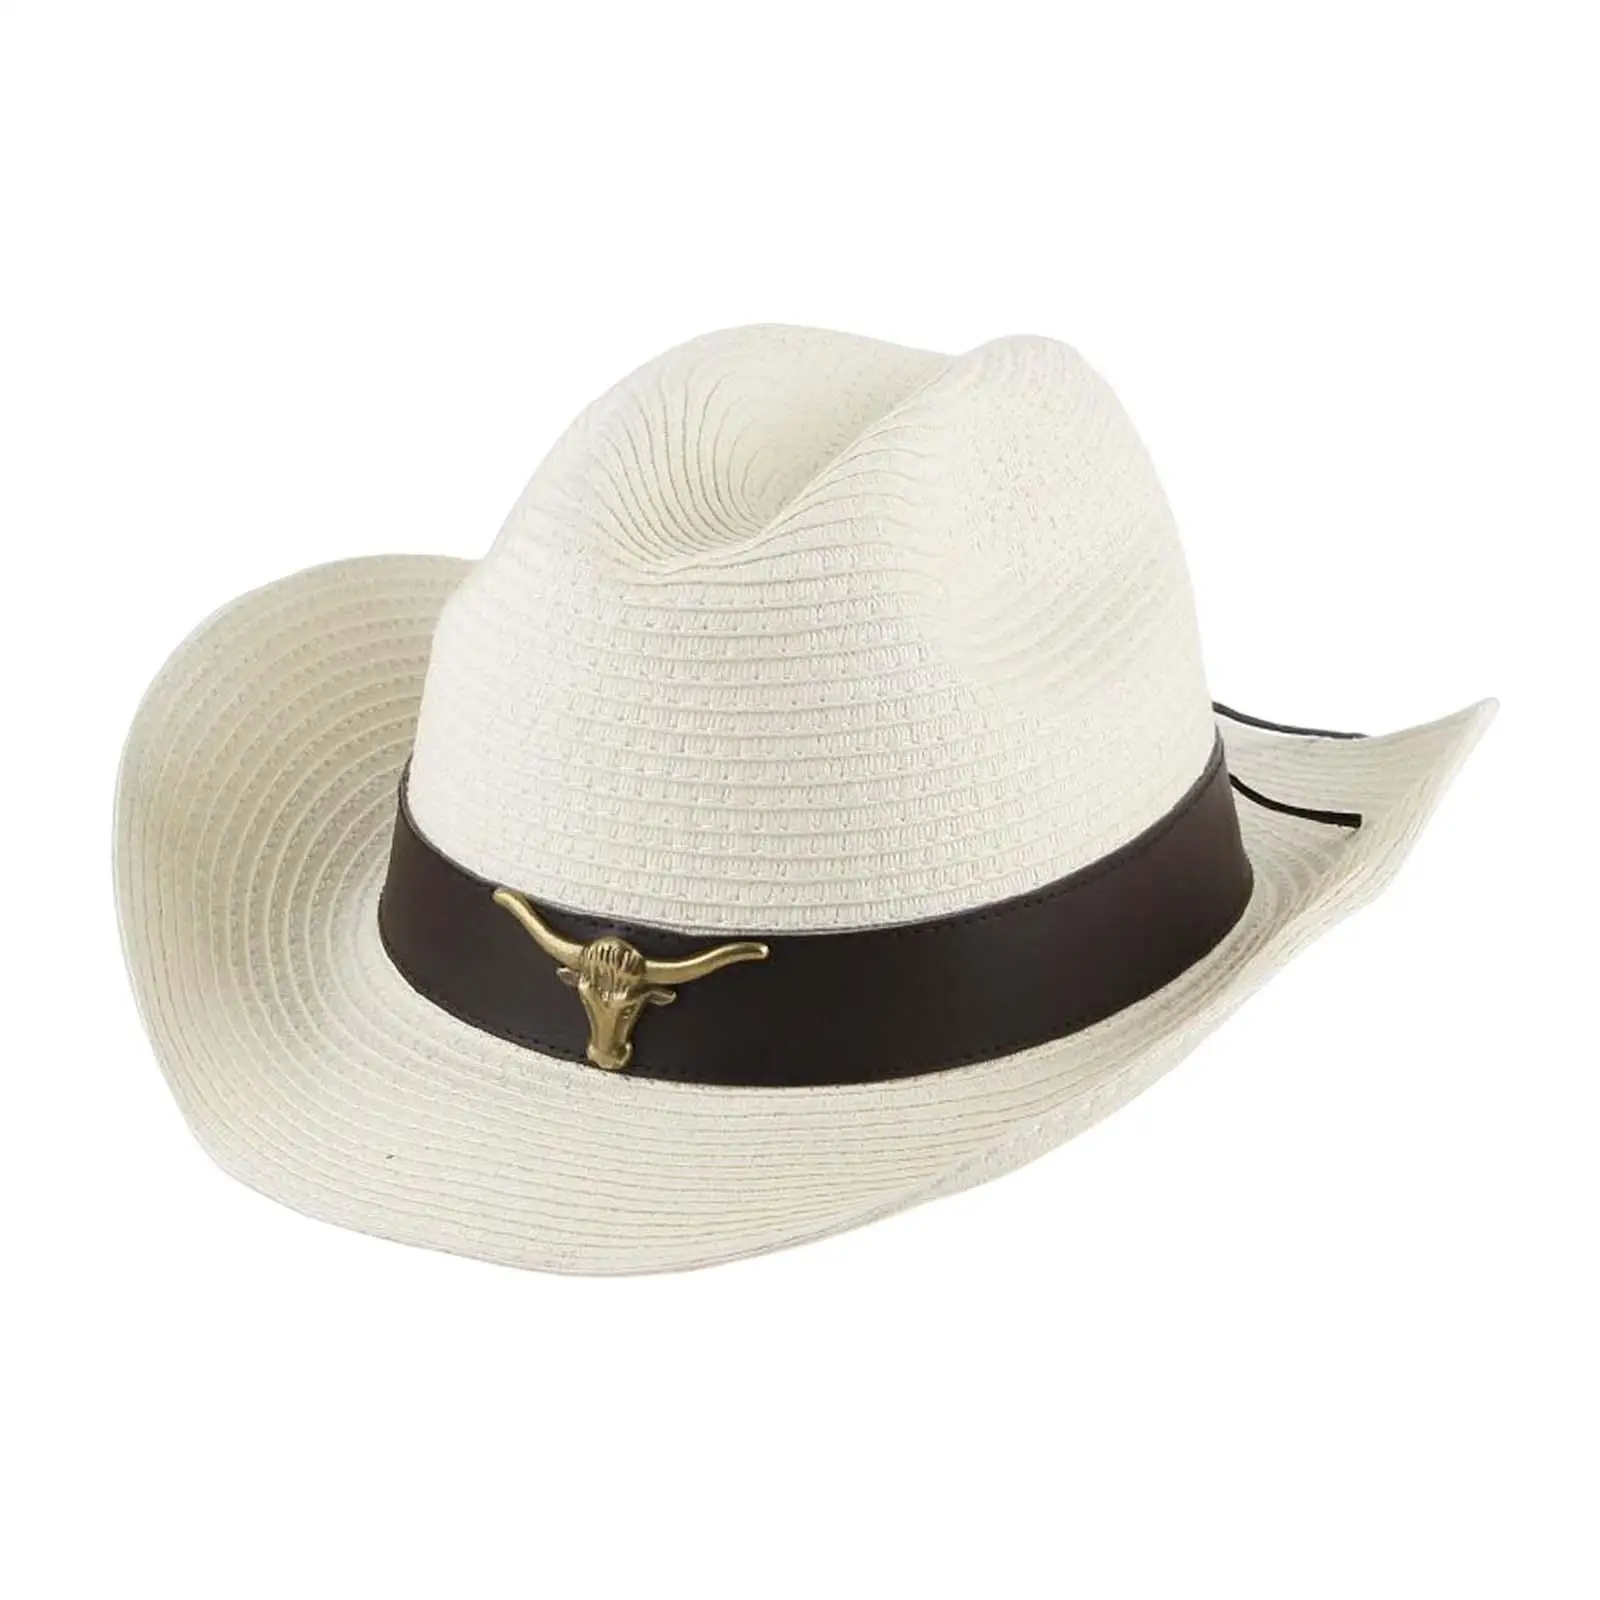 Fashionable Western Cowboy Hat Sunshade Hat Wide Brim Cow Decorate Costume Unisex Straw for Outdoor Holiday Beach Adults Women